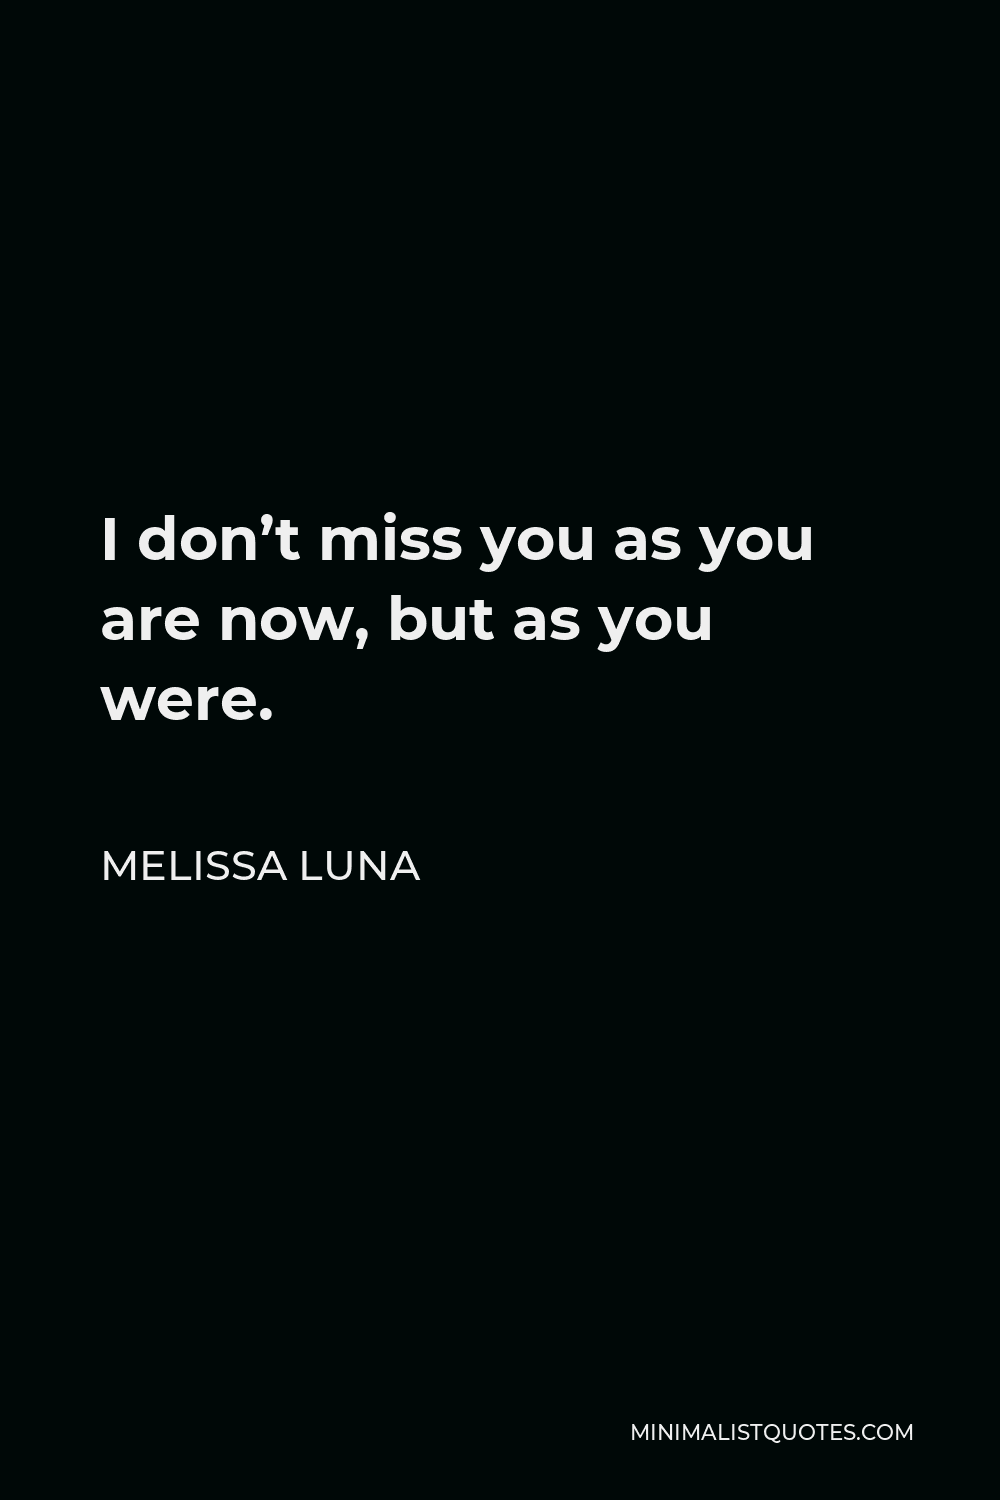 Melissa Luna Quote - I don’t miss you as you are now, but as you were.